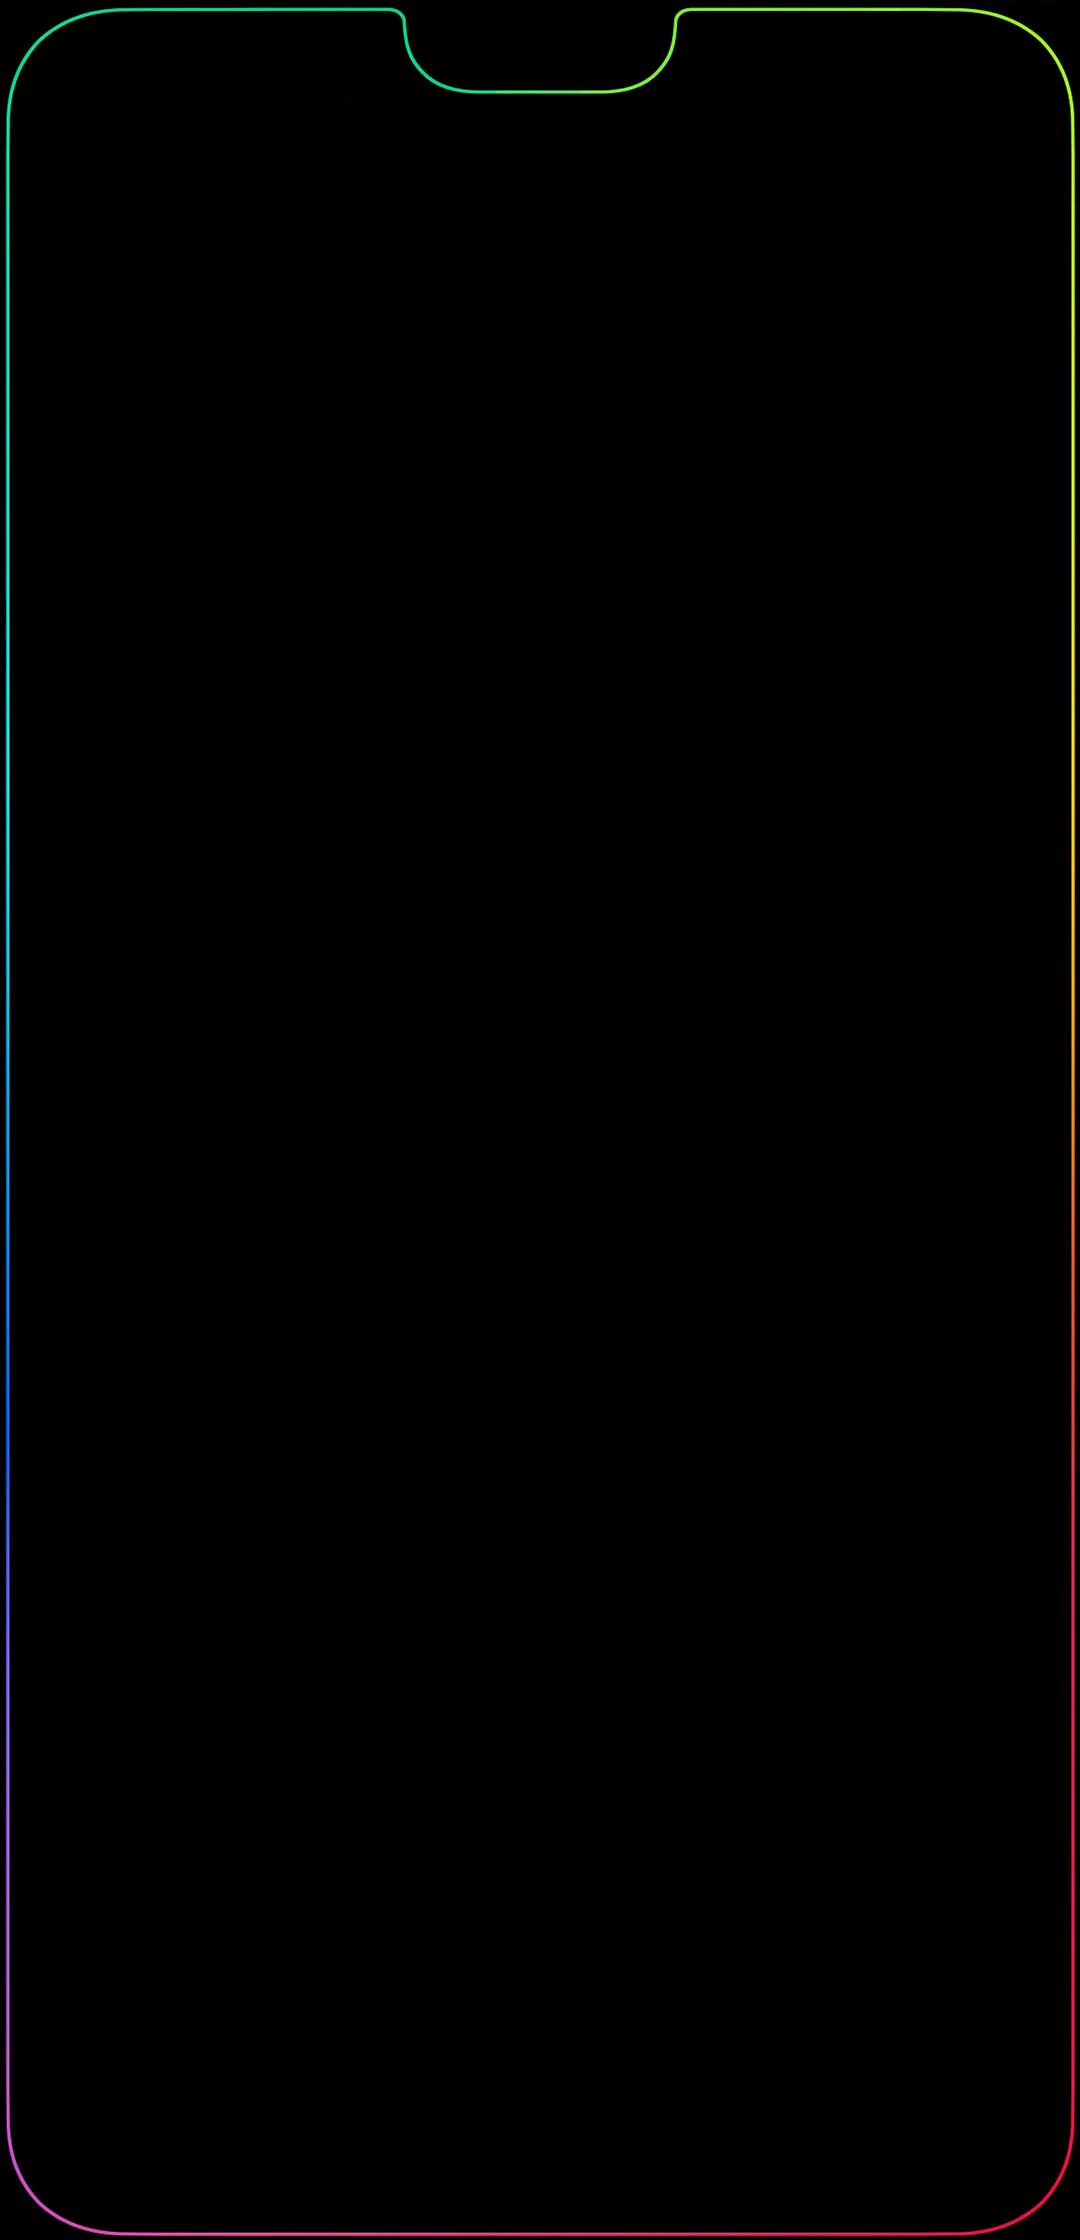 An awesome wallpaper for the p20 pro embracing the notch. Thank you